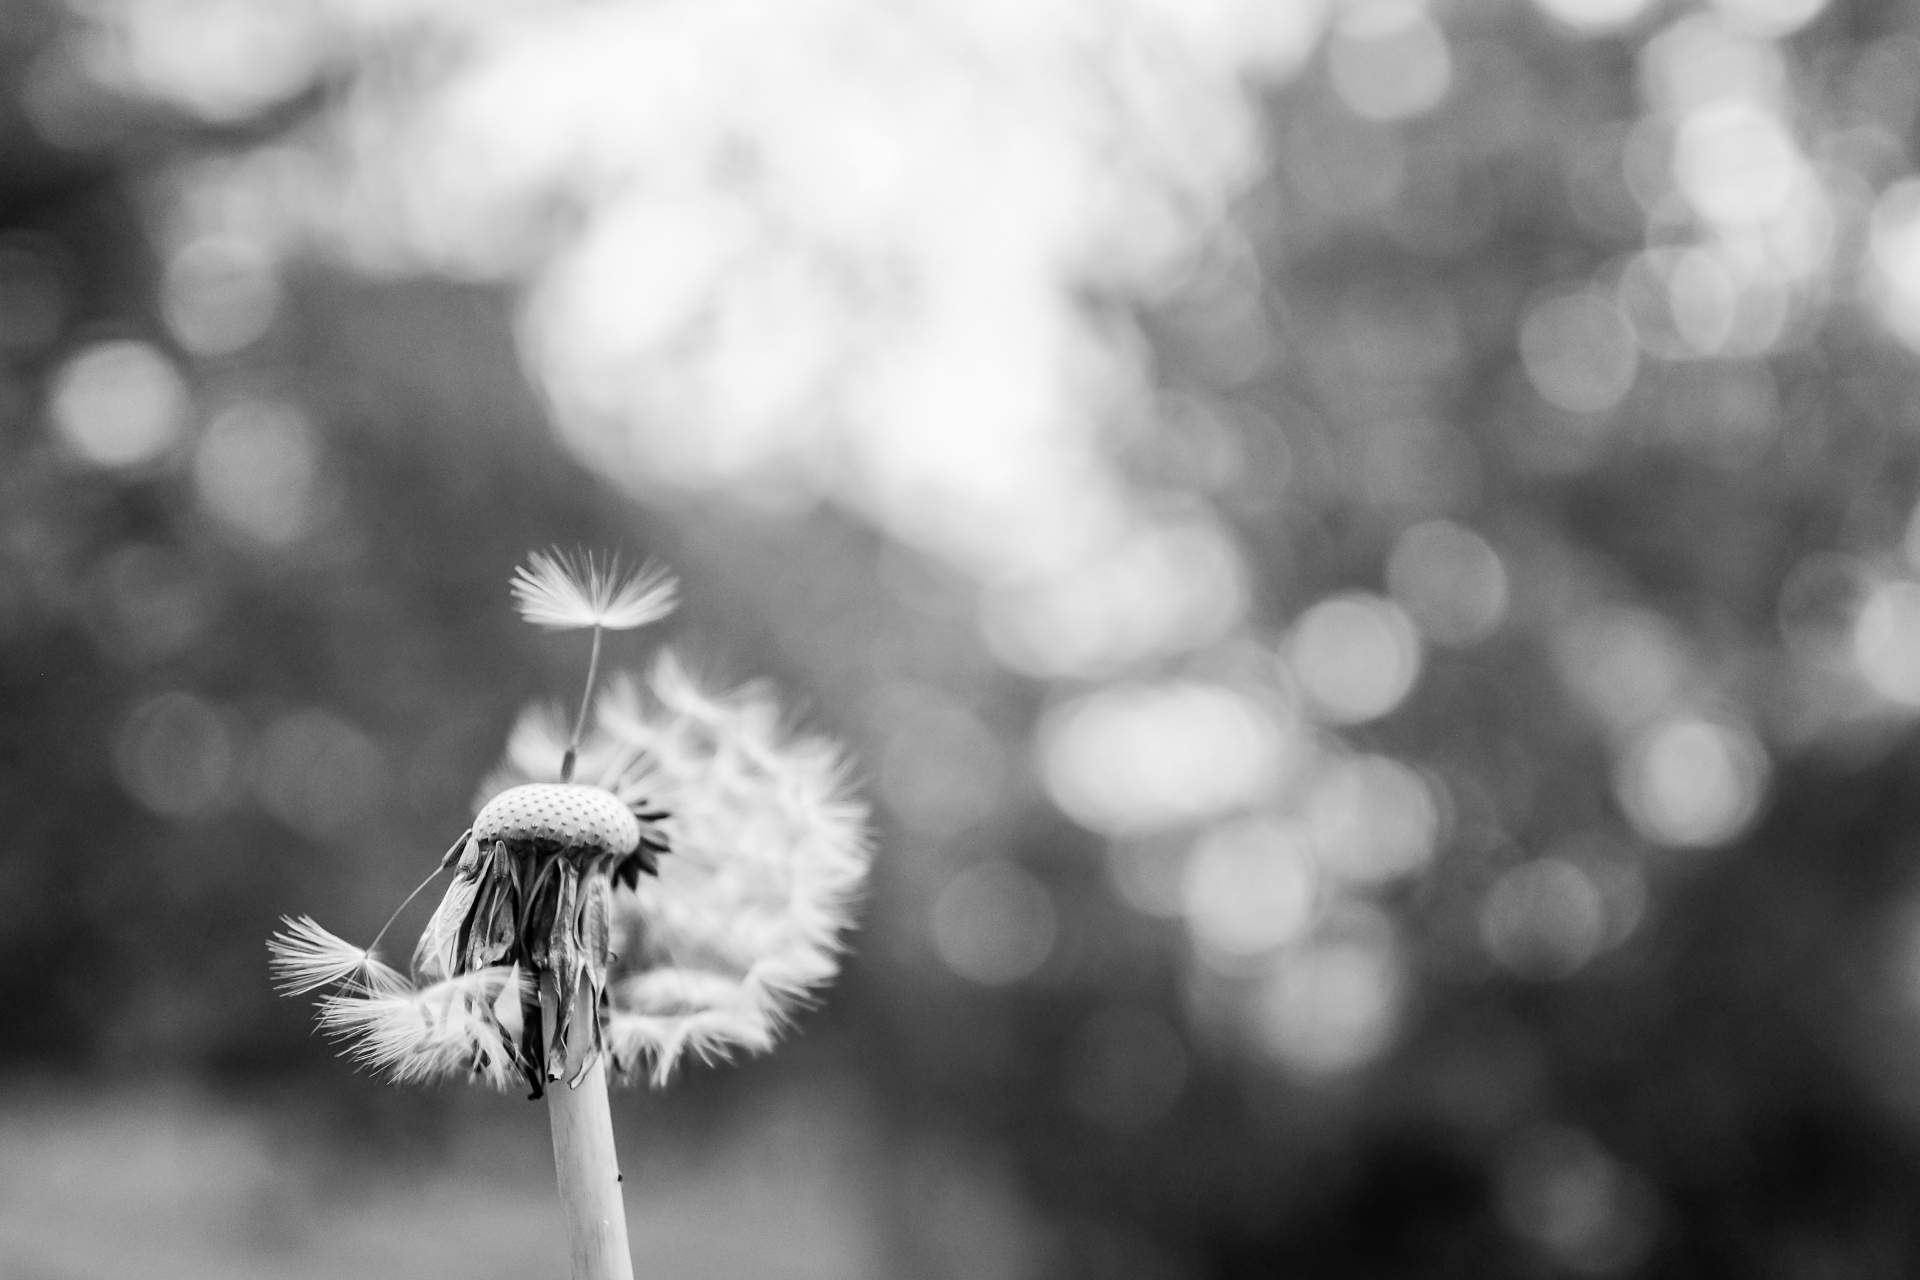 Black and white photo of a dandelion.